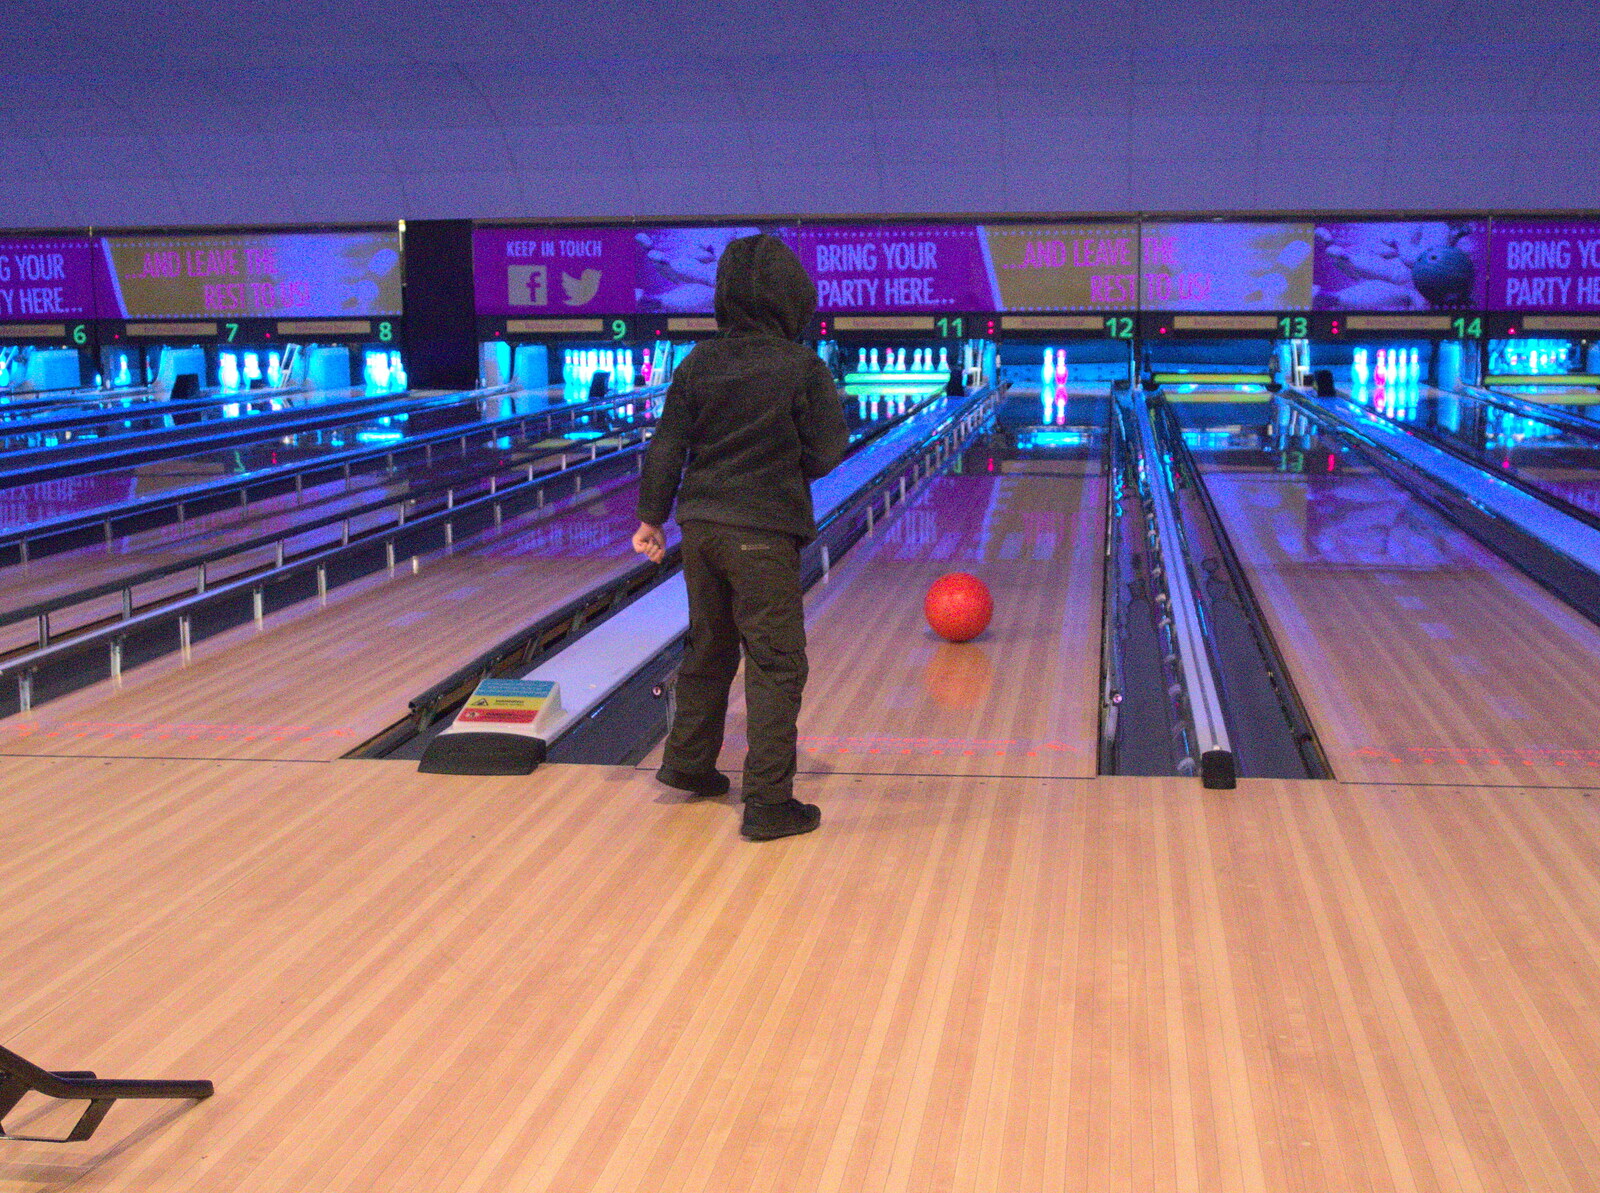 Fred hurls another ball down the lane from Ten-Pin Bowling, Riverside, Norwich - 3rd January 2016